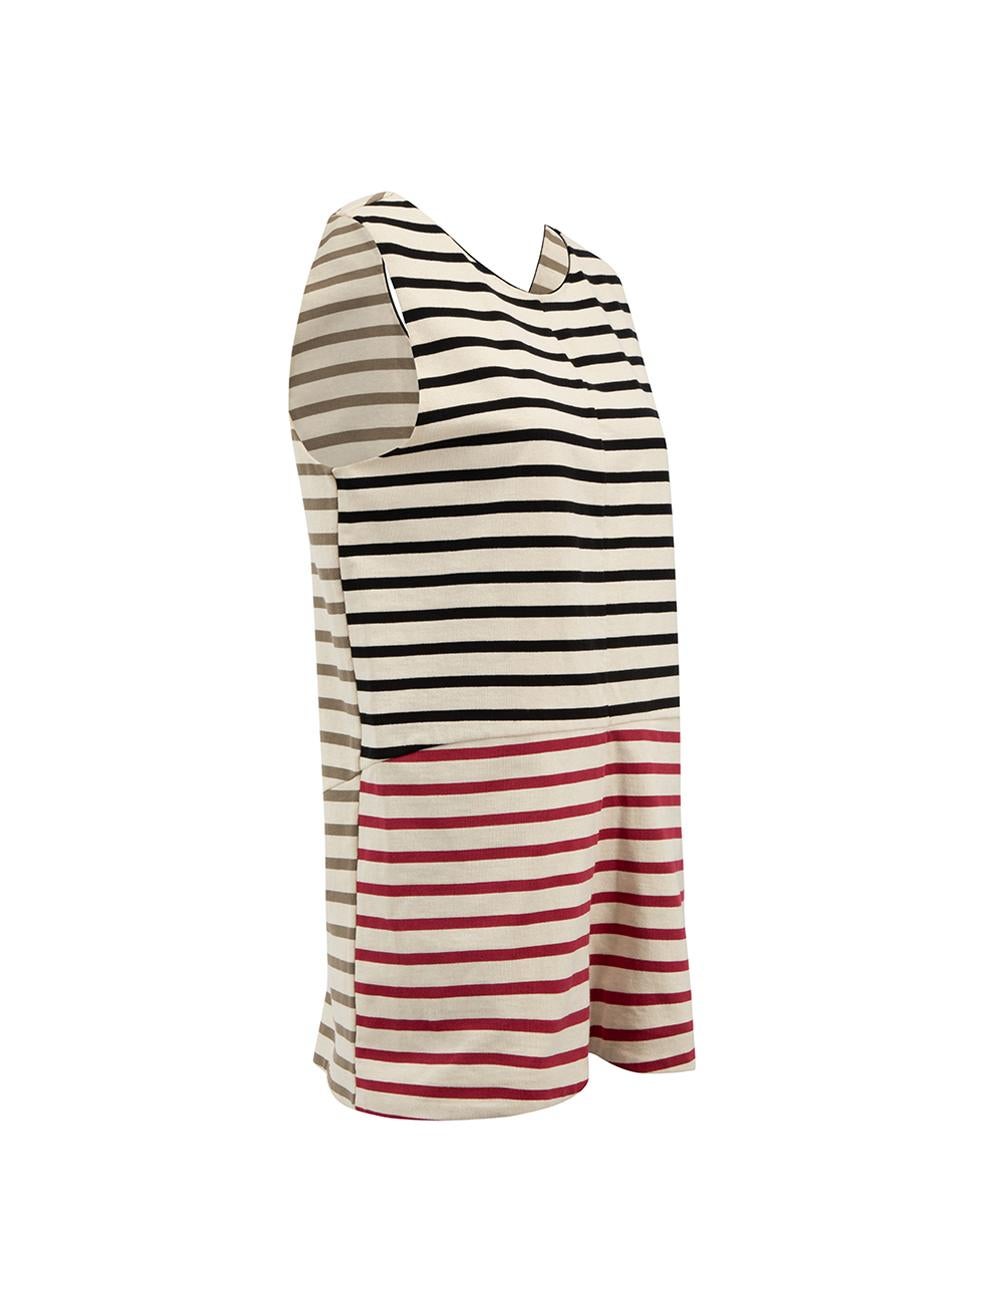 CONDITION is Very good. Minimal wear to top is evident. Small mark on bottom side of dress seen on this used Marni designer resale item.



Details


Cream

Cotton

Tunic top

Black, red and grey striped pattern

Sleeveless

Mini

Round